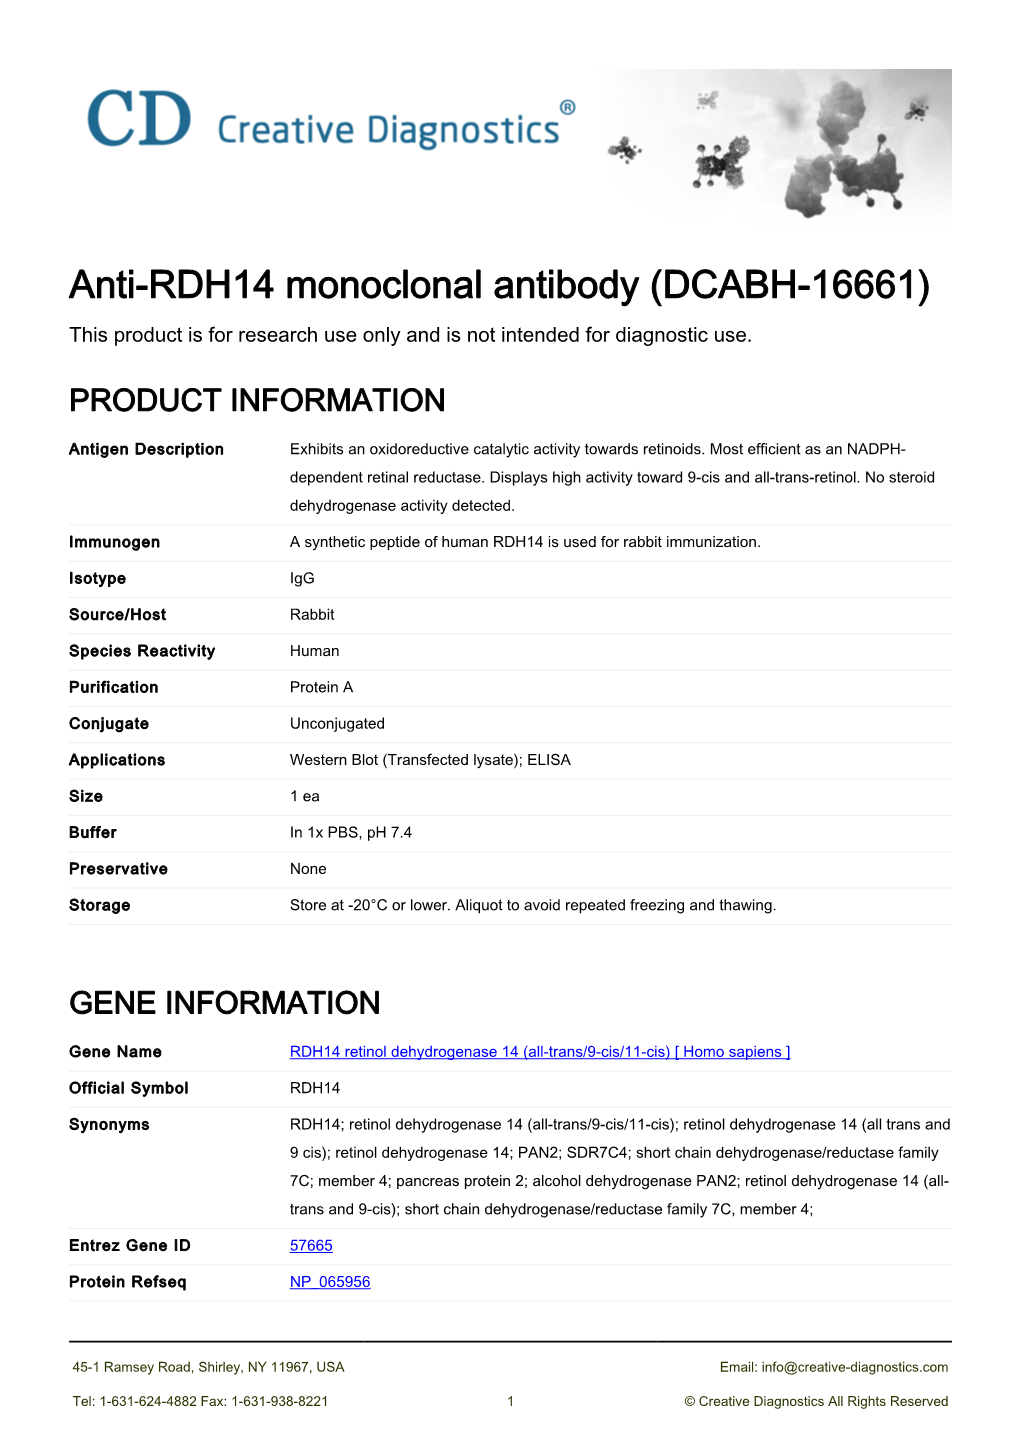 Anti-RDH14 Monoclonal Antibody (DCABH-16661) This Product Is for Research Use Only and Is Not Intended for Diagnostic Use